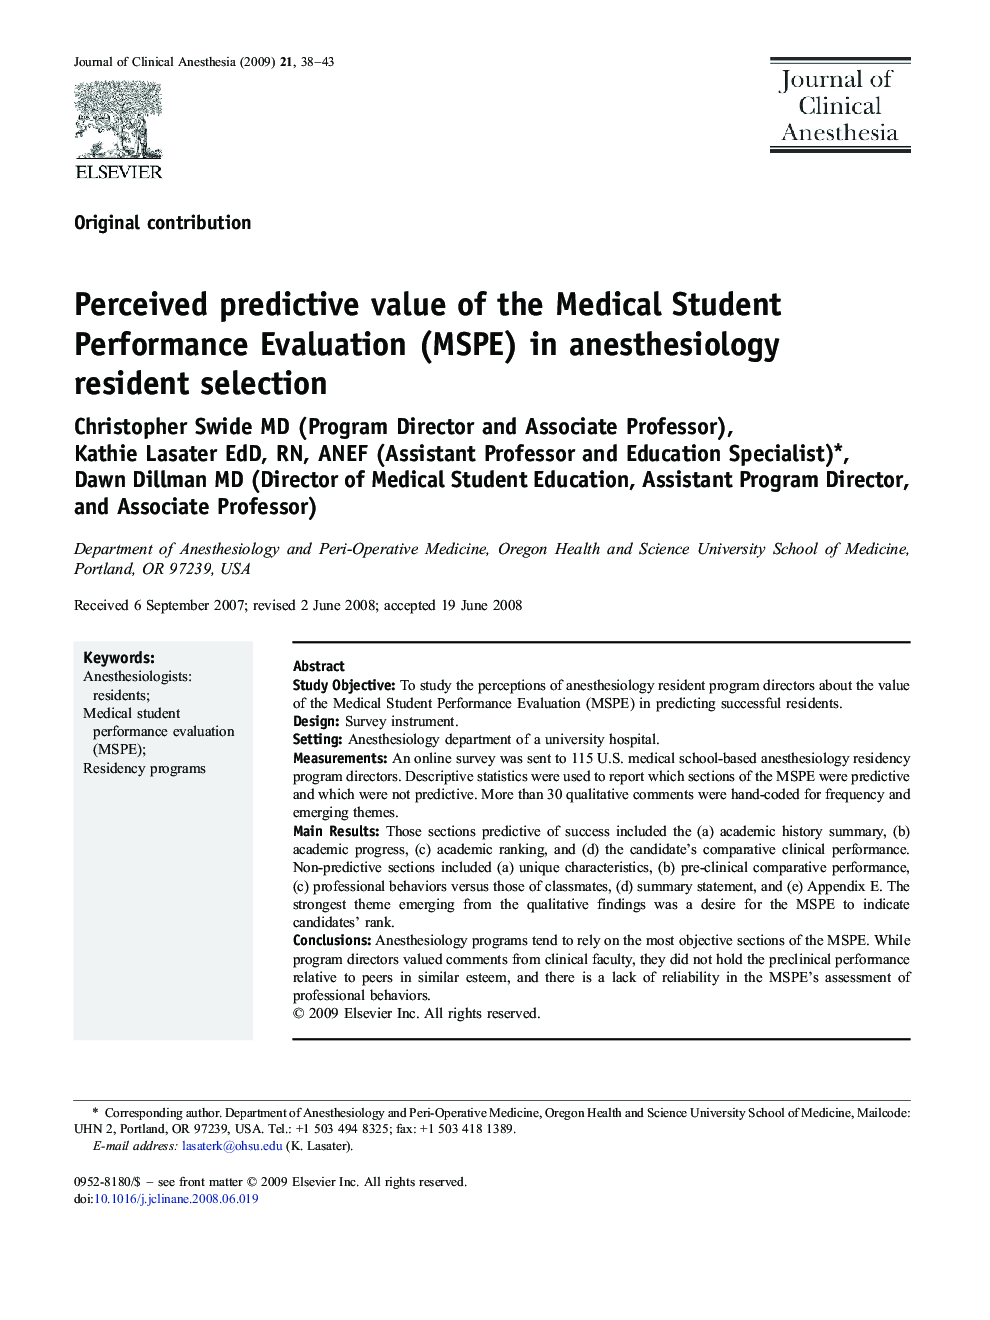 Perceived predictive value of the Medical Student Performance Evaluation (MSPE) in anesthesiology resident selection